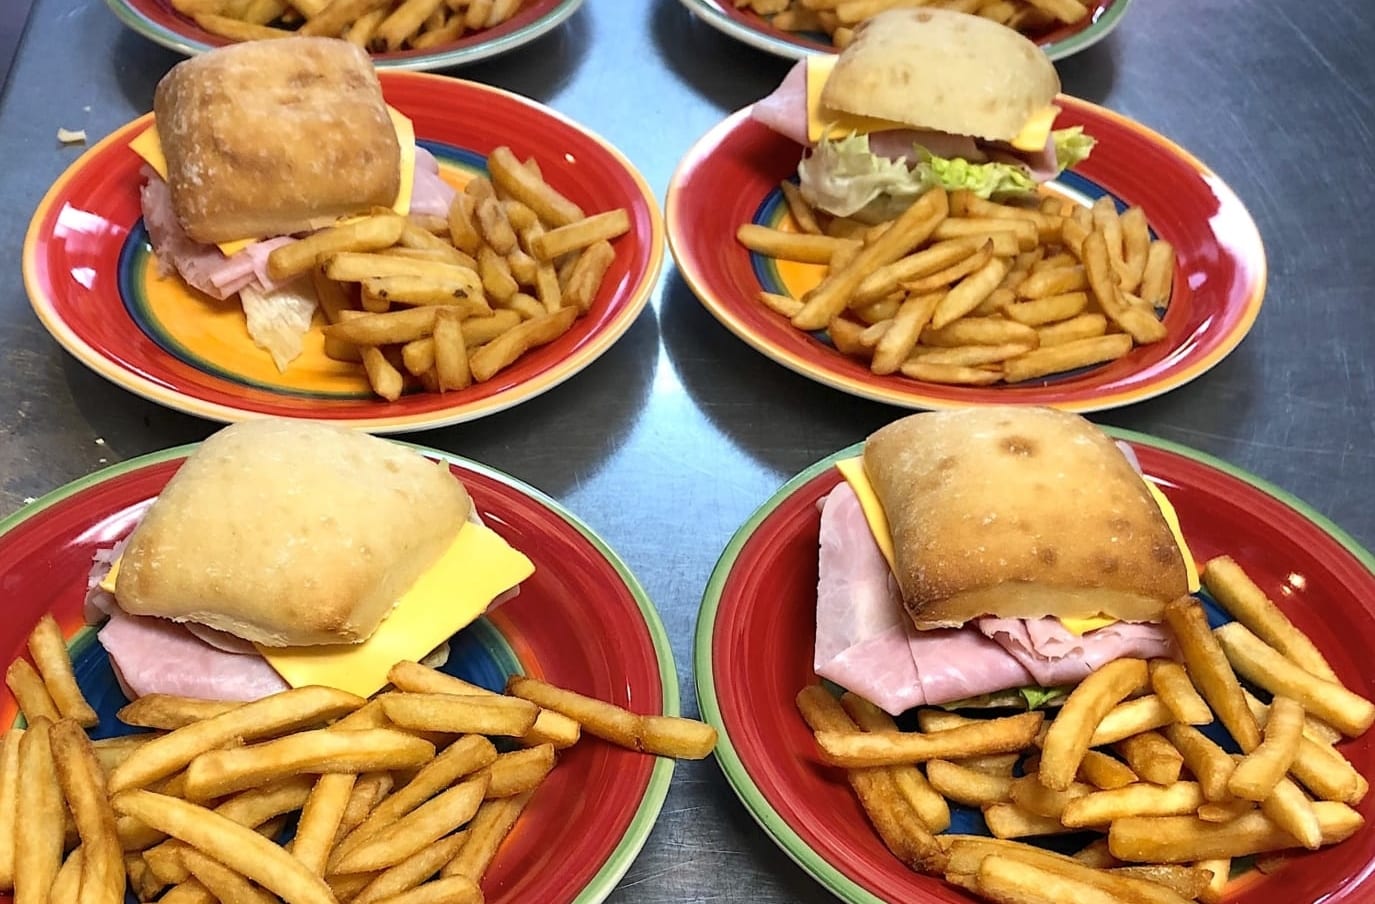 Sandwiches and fries on colorful plates. 